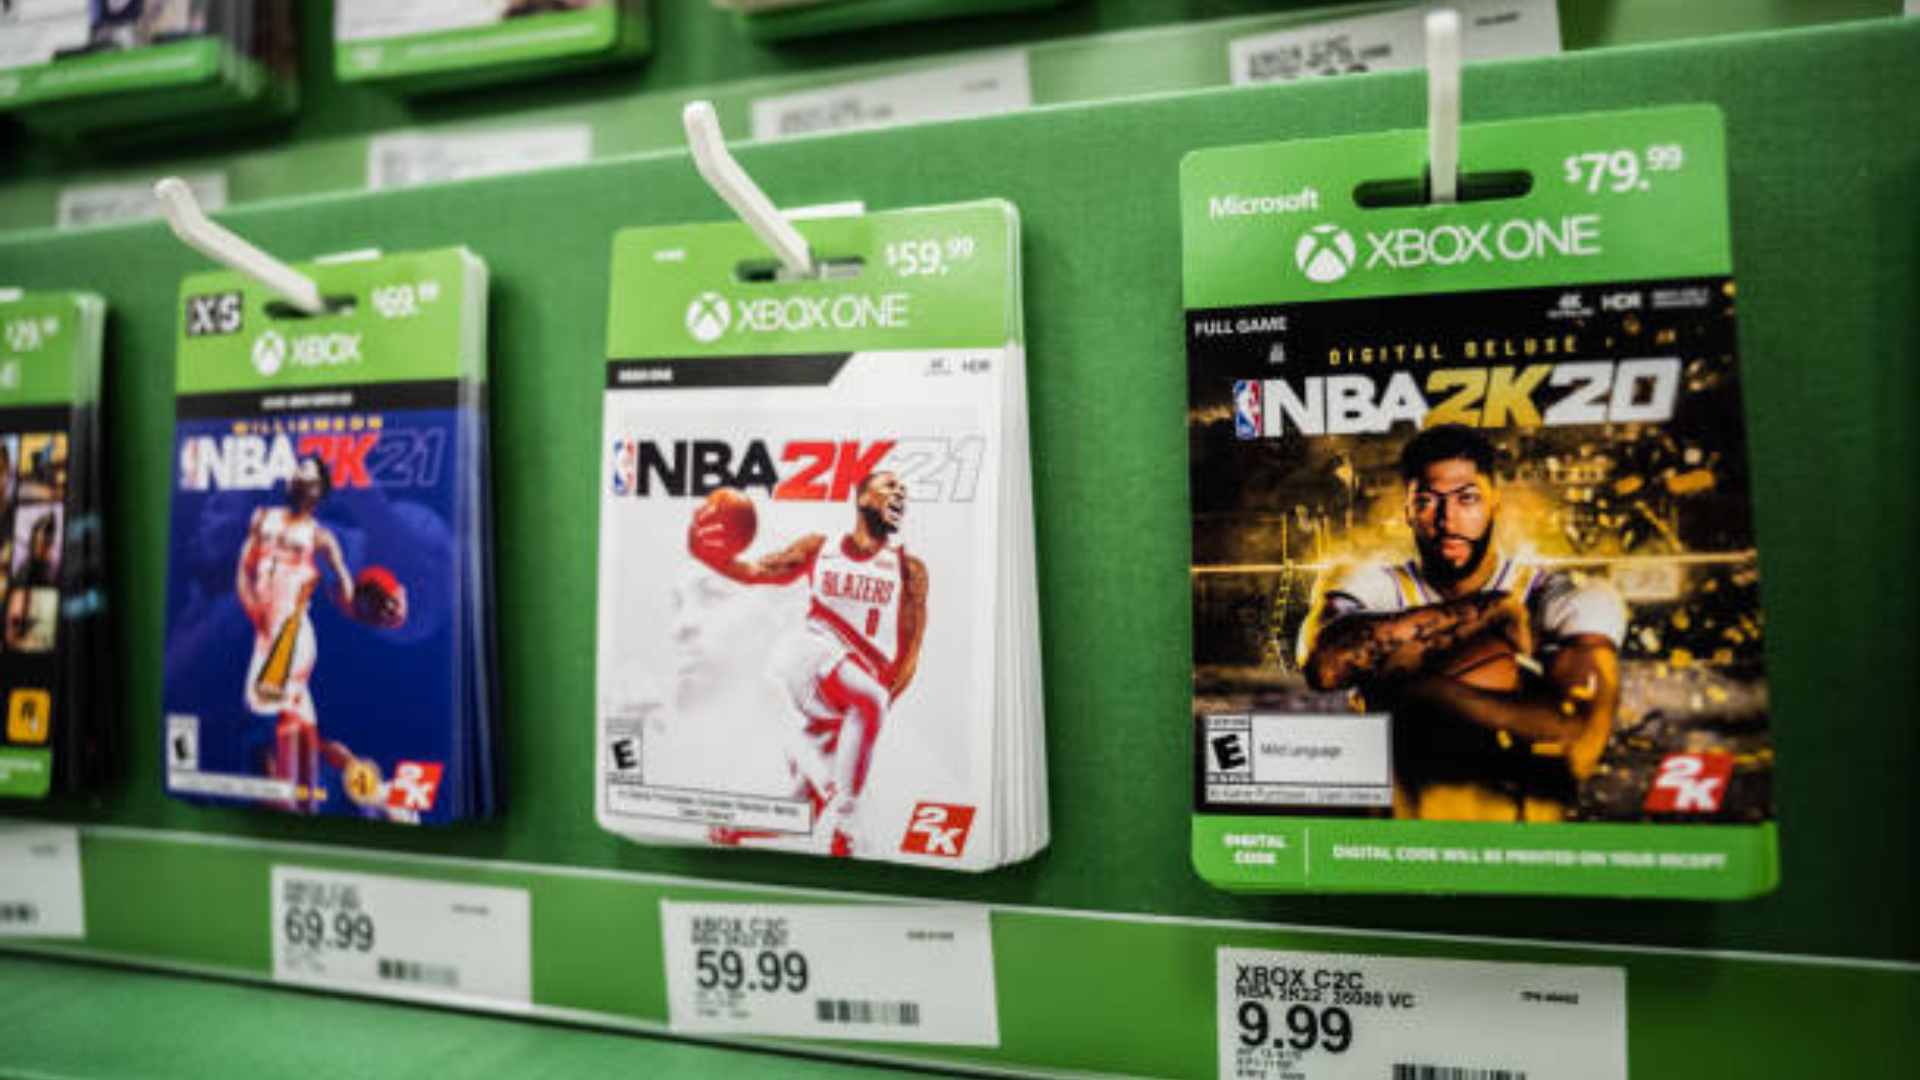 Video games on sale